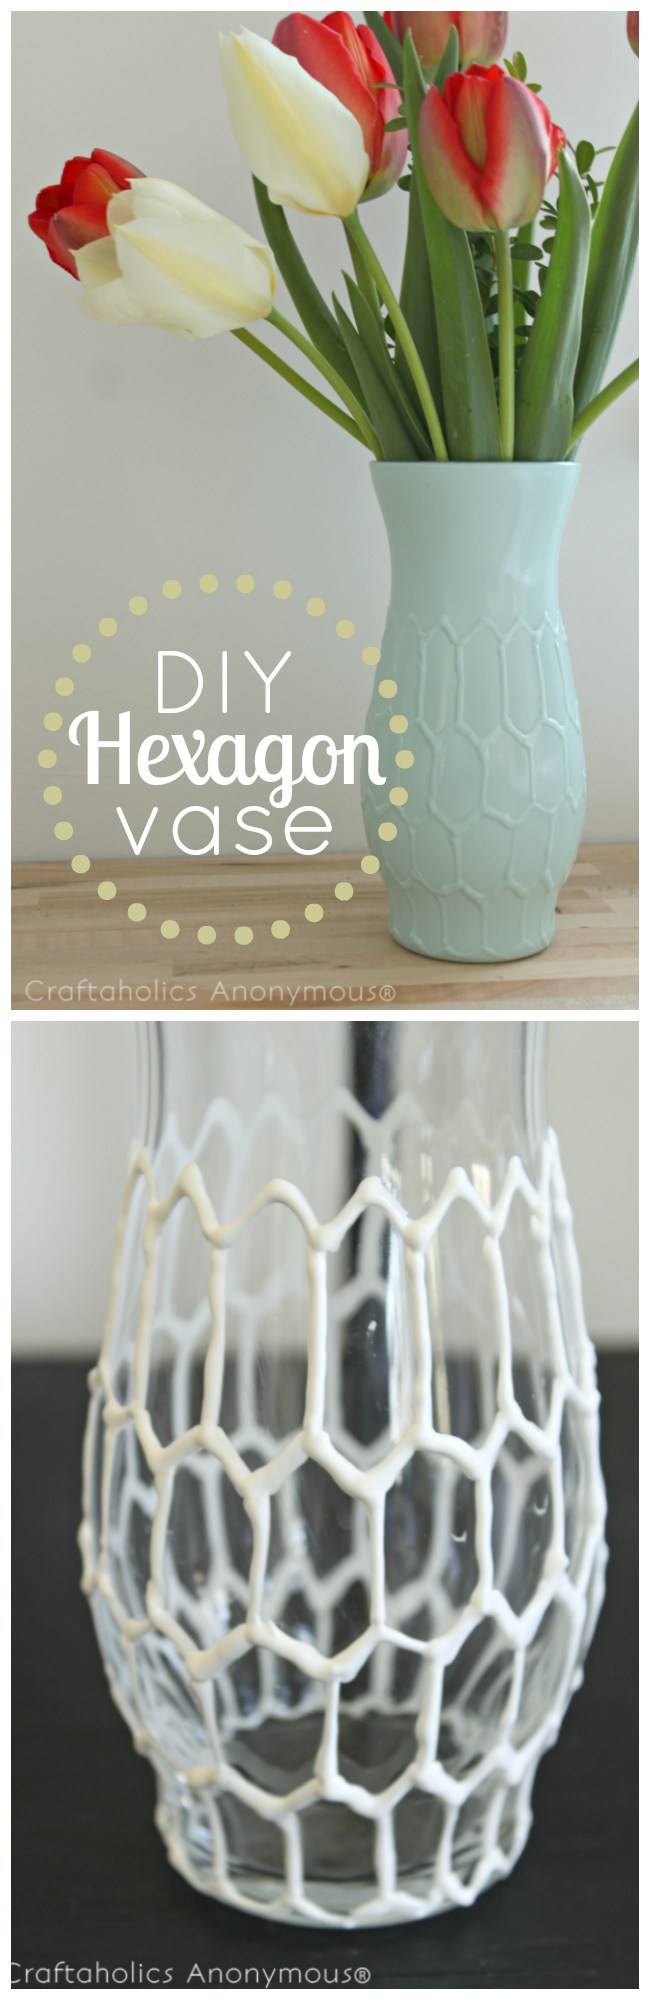 DIY hexagon vase tutorial. Seriously in love with this vase! #hexagon #craft